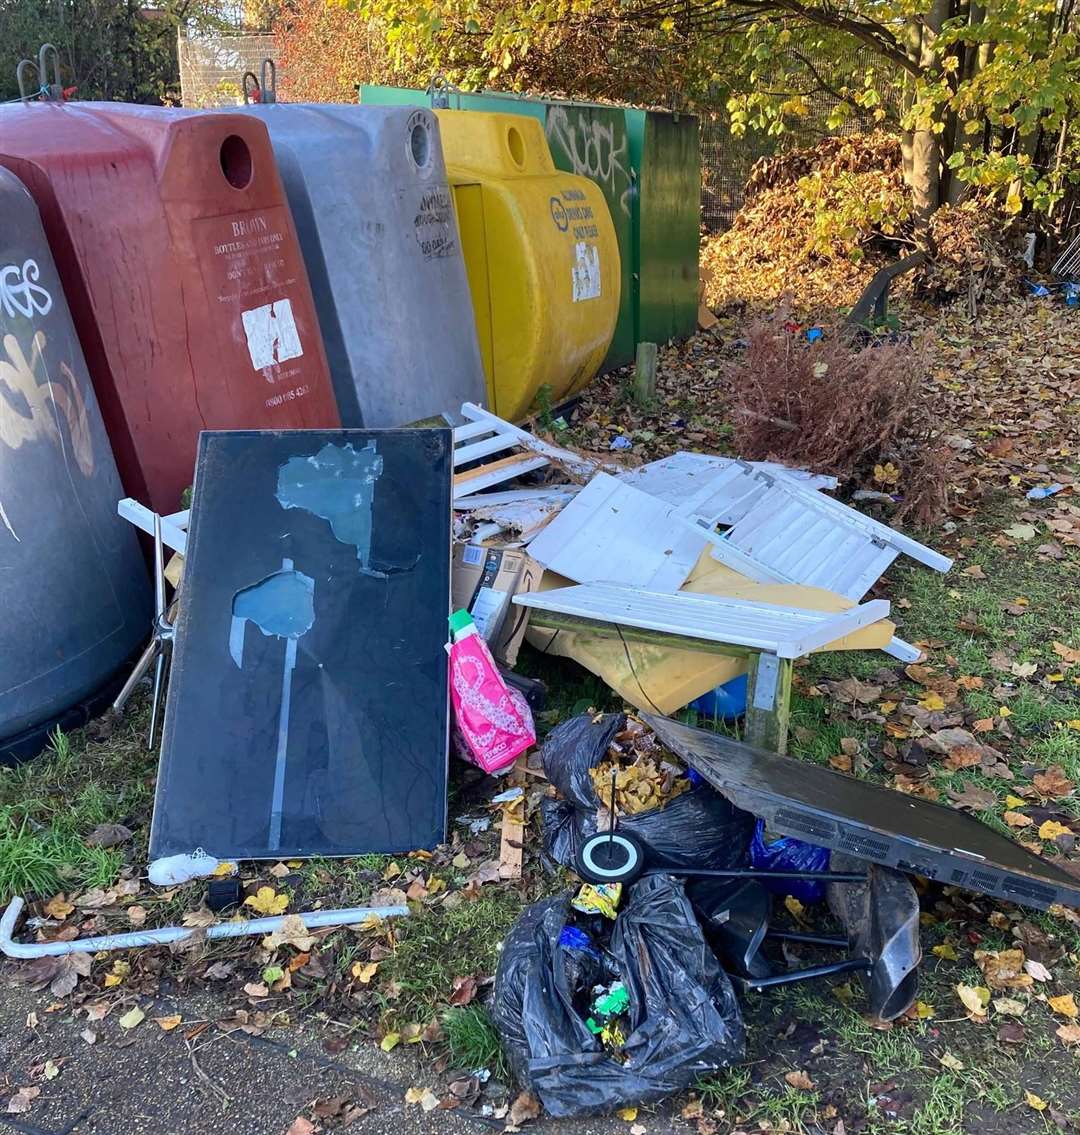 The latest spate of fly-tipping in Gravesham saw £400 worth of fines issued. Picture: Gravesham council